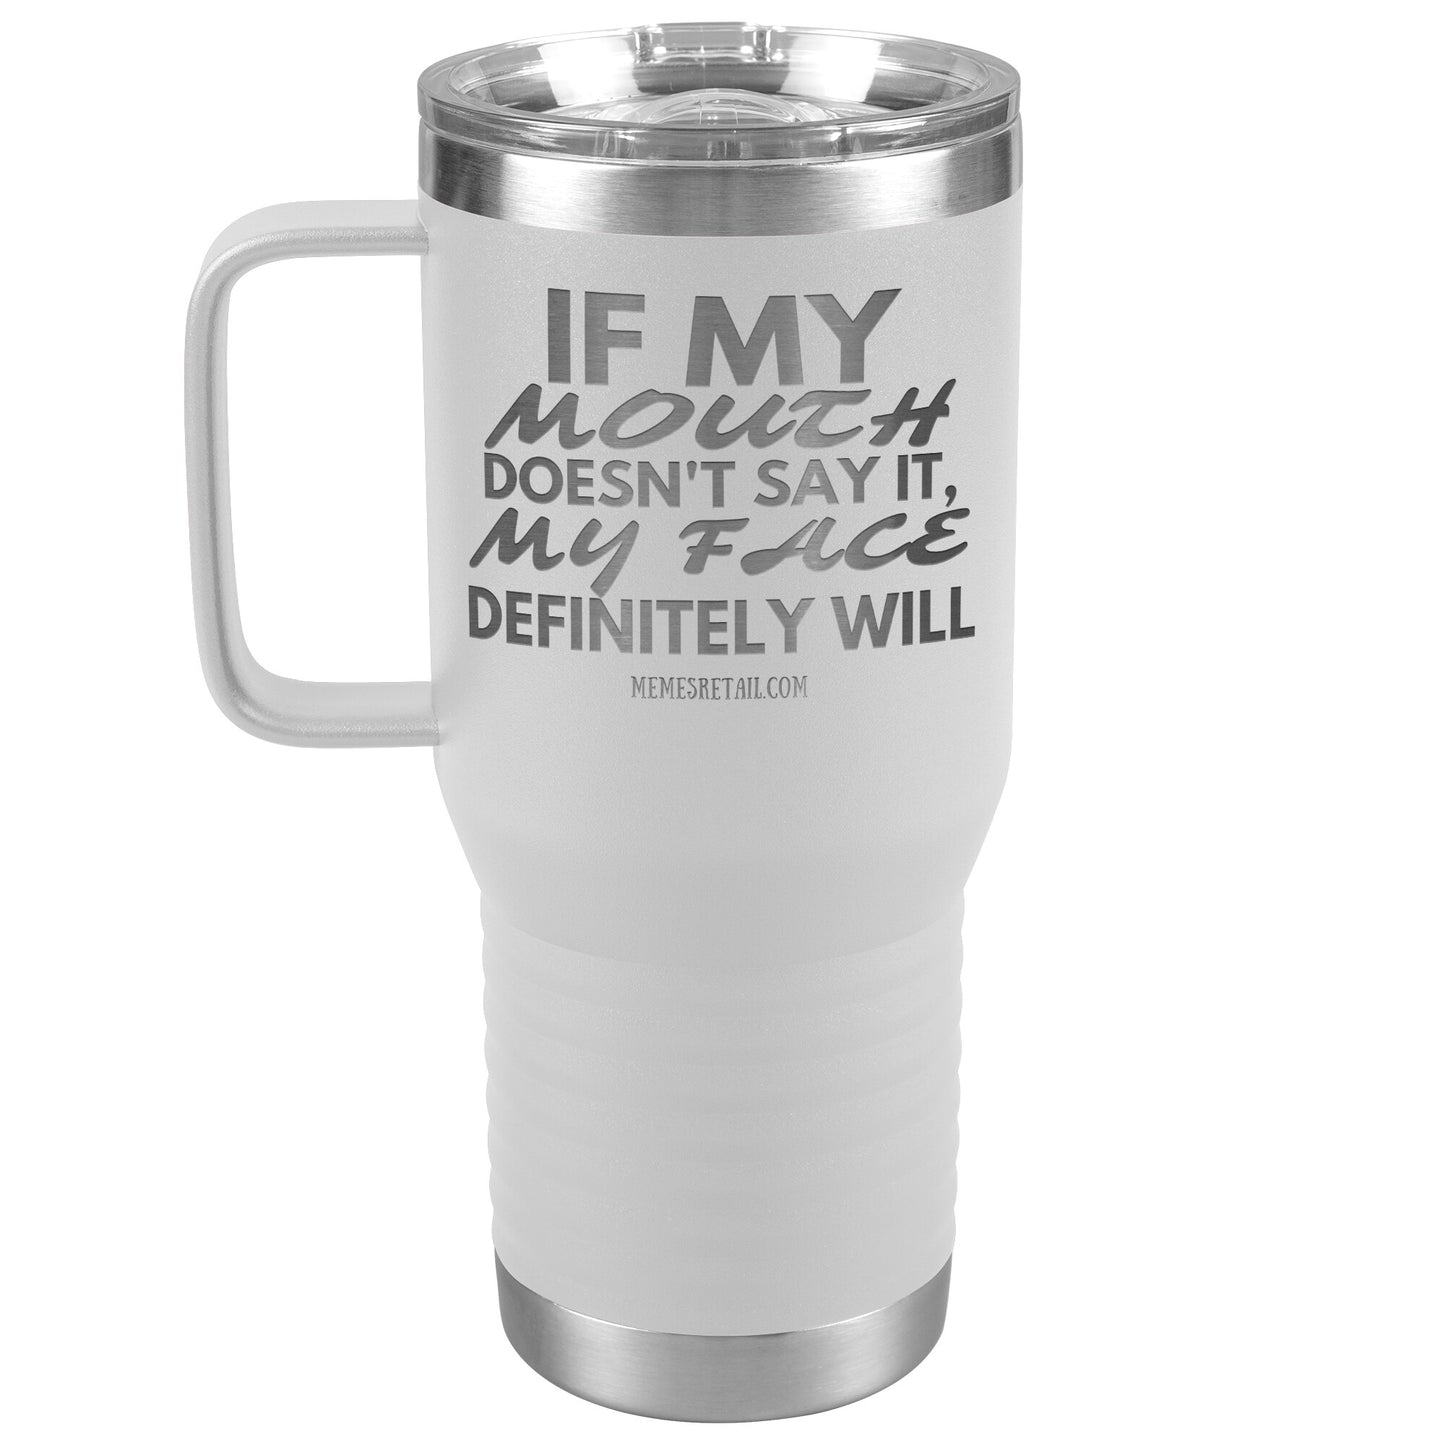 If my mouth doesn't say it, my face definitely will Tumblers, 20oz Travel Tumbler / White - MemesRetail.com